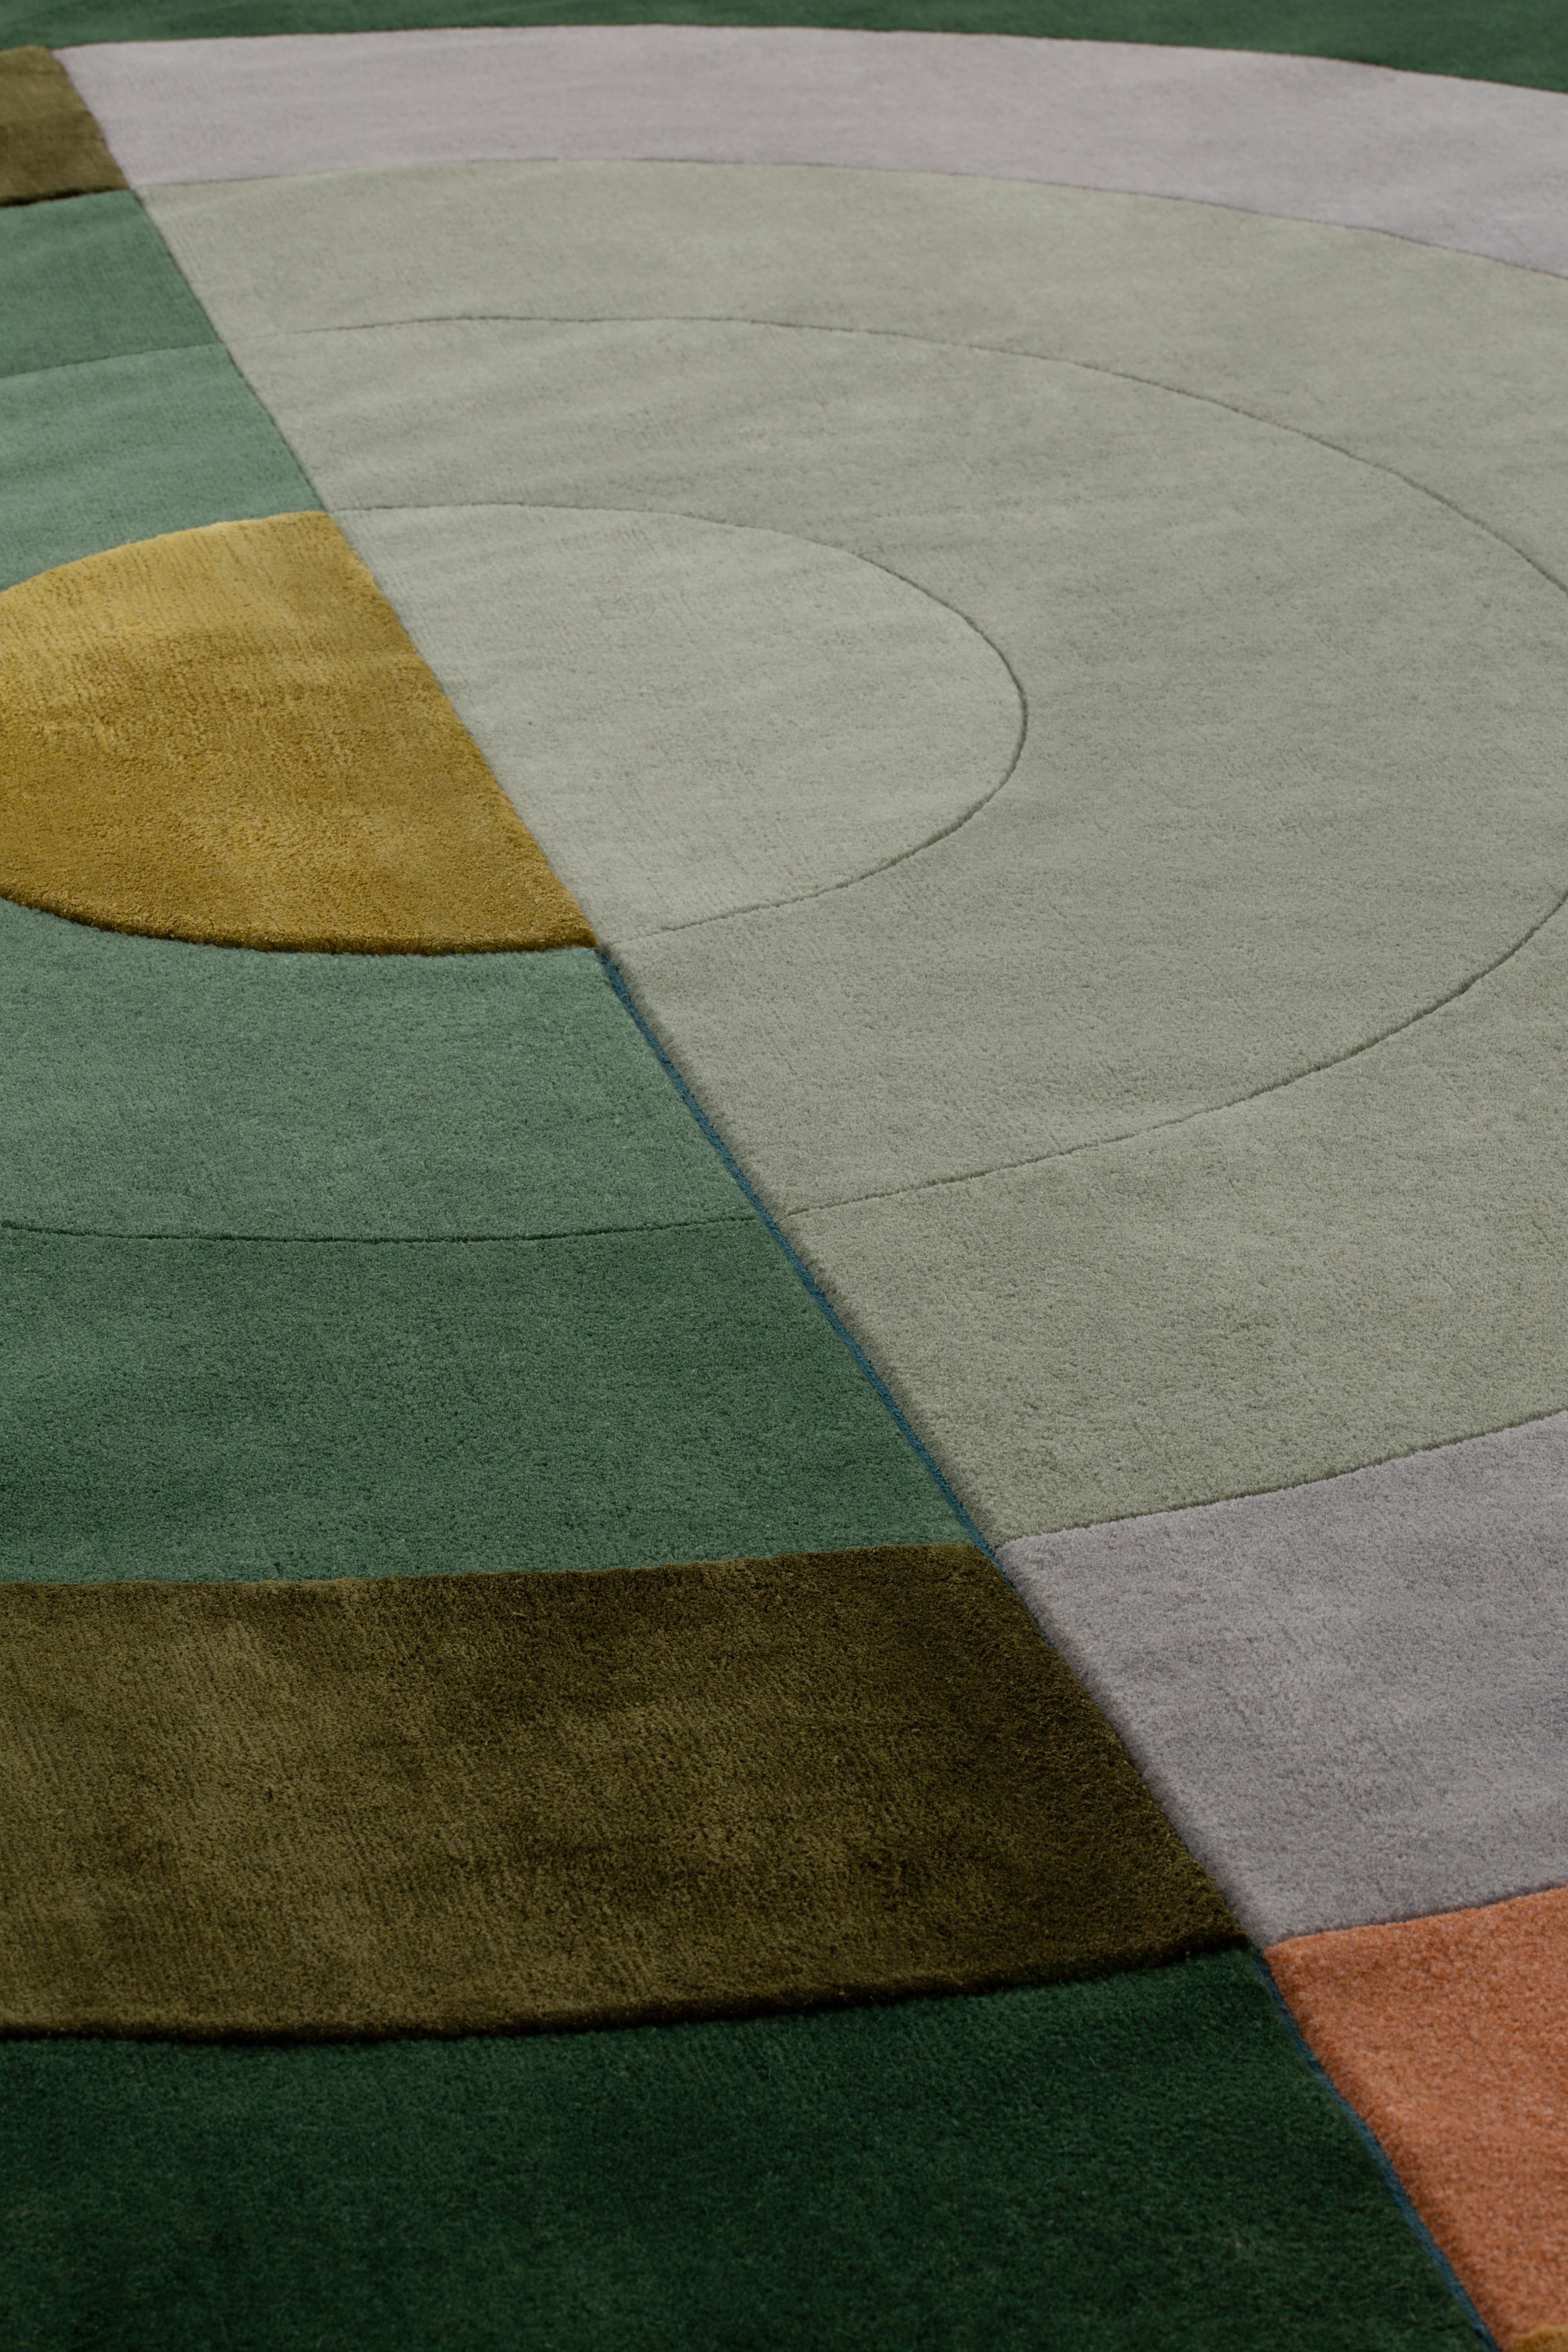 Born in France. Designed in Milan. Produced in Nepal.
cc-tapis is an Italian company which produces contemporary hand-knotted rugs which are created in Nepal by expert Tibetan artisans.
The company was founded by Nelcya Chamszadeh and Fabrizio